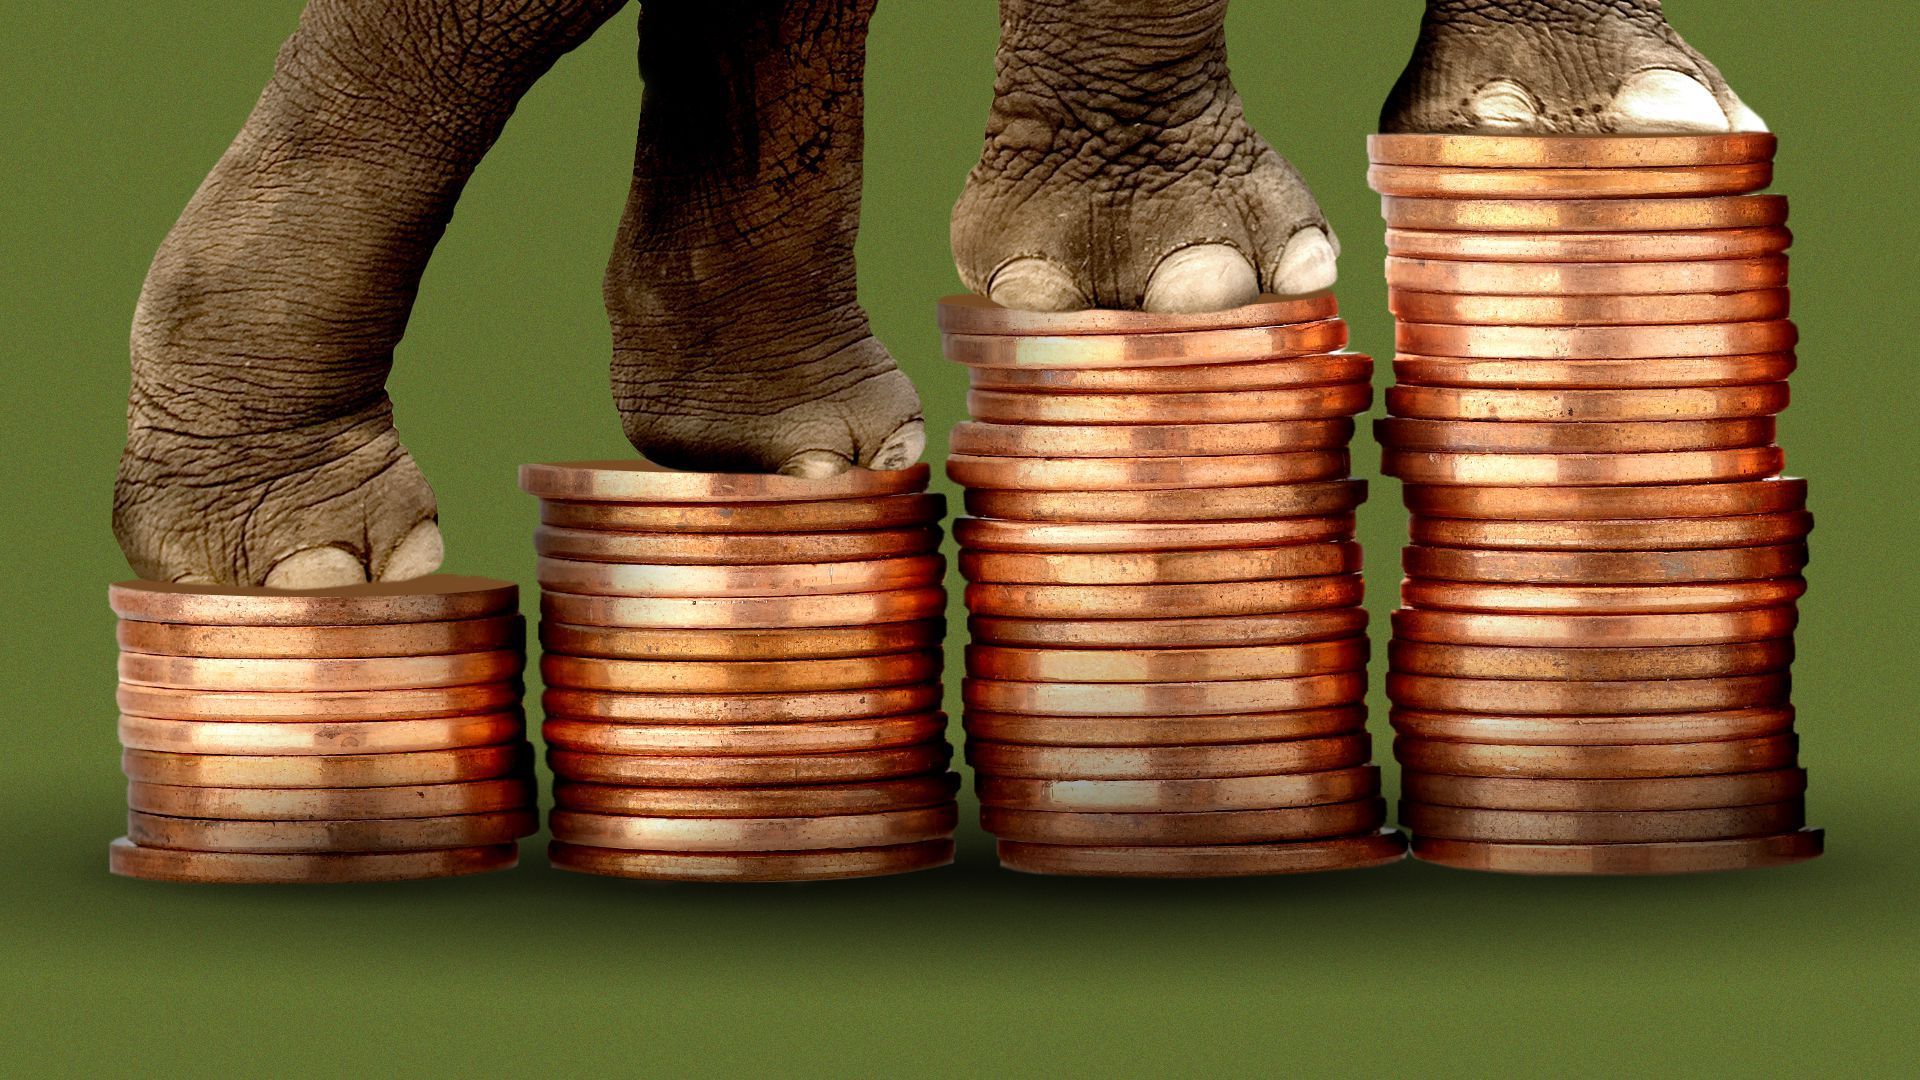 An illustration shows elephant feet climbing increasing stacks of pennies.